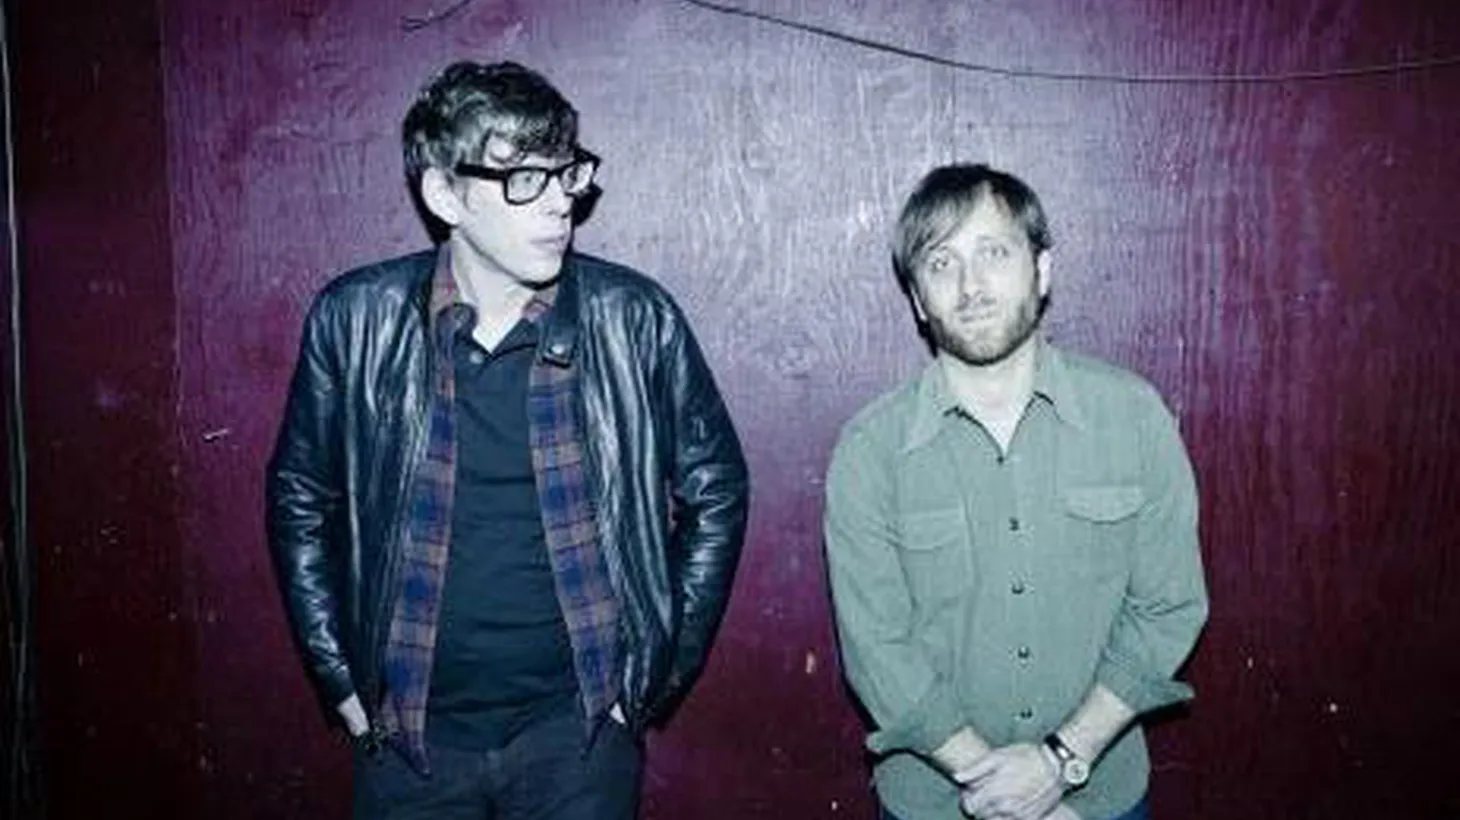 We air a special preview with The Black Keys as they unveil tracks from their highly anticipated release, El Camino.